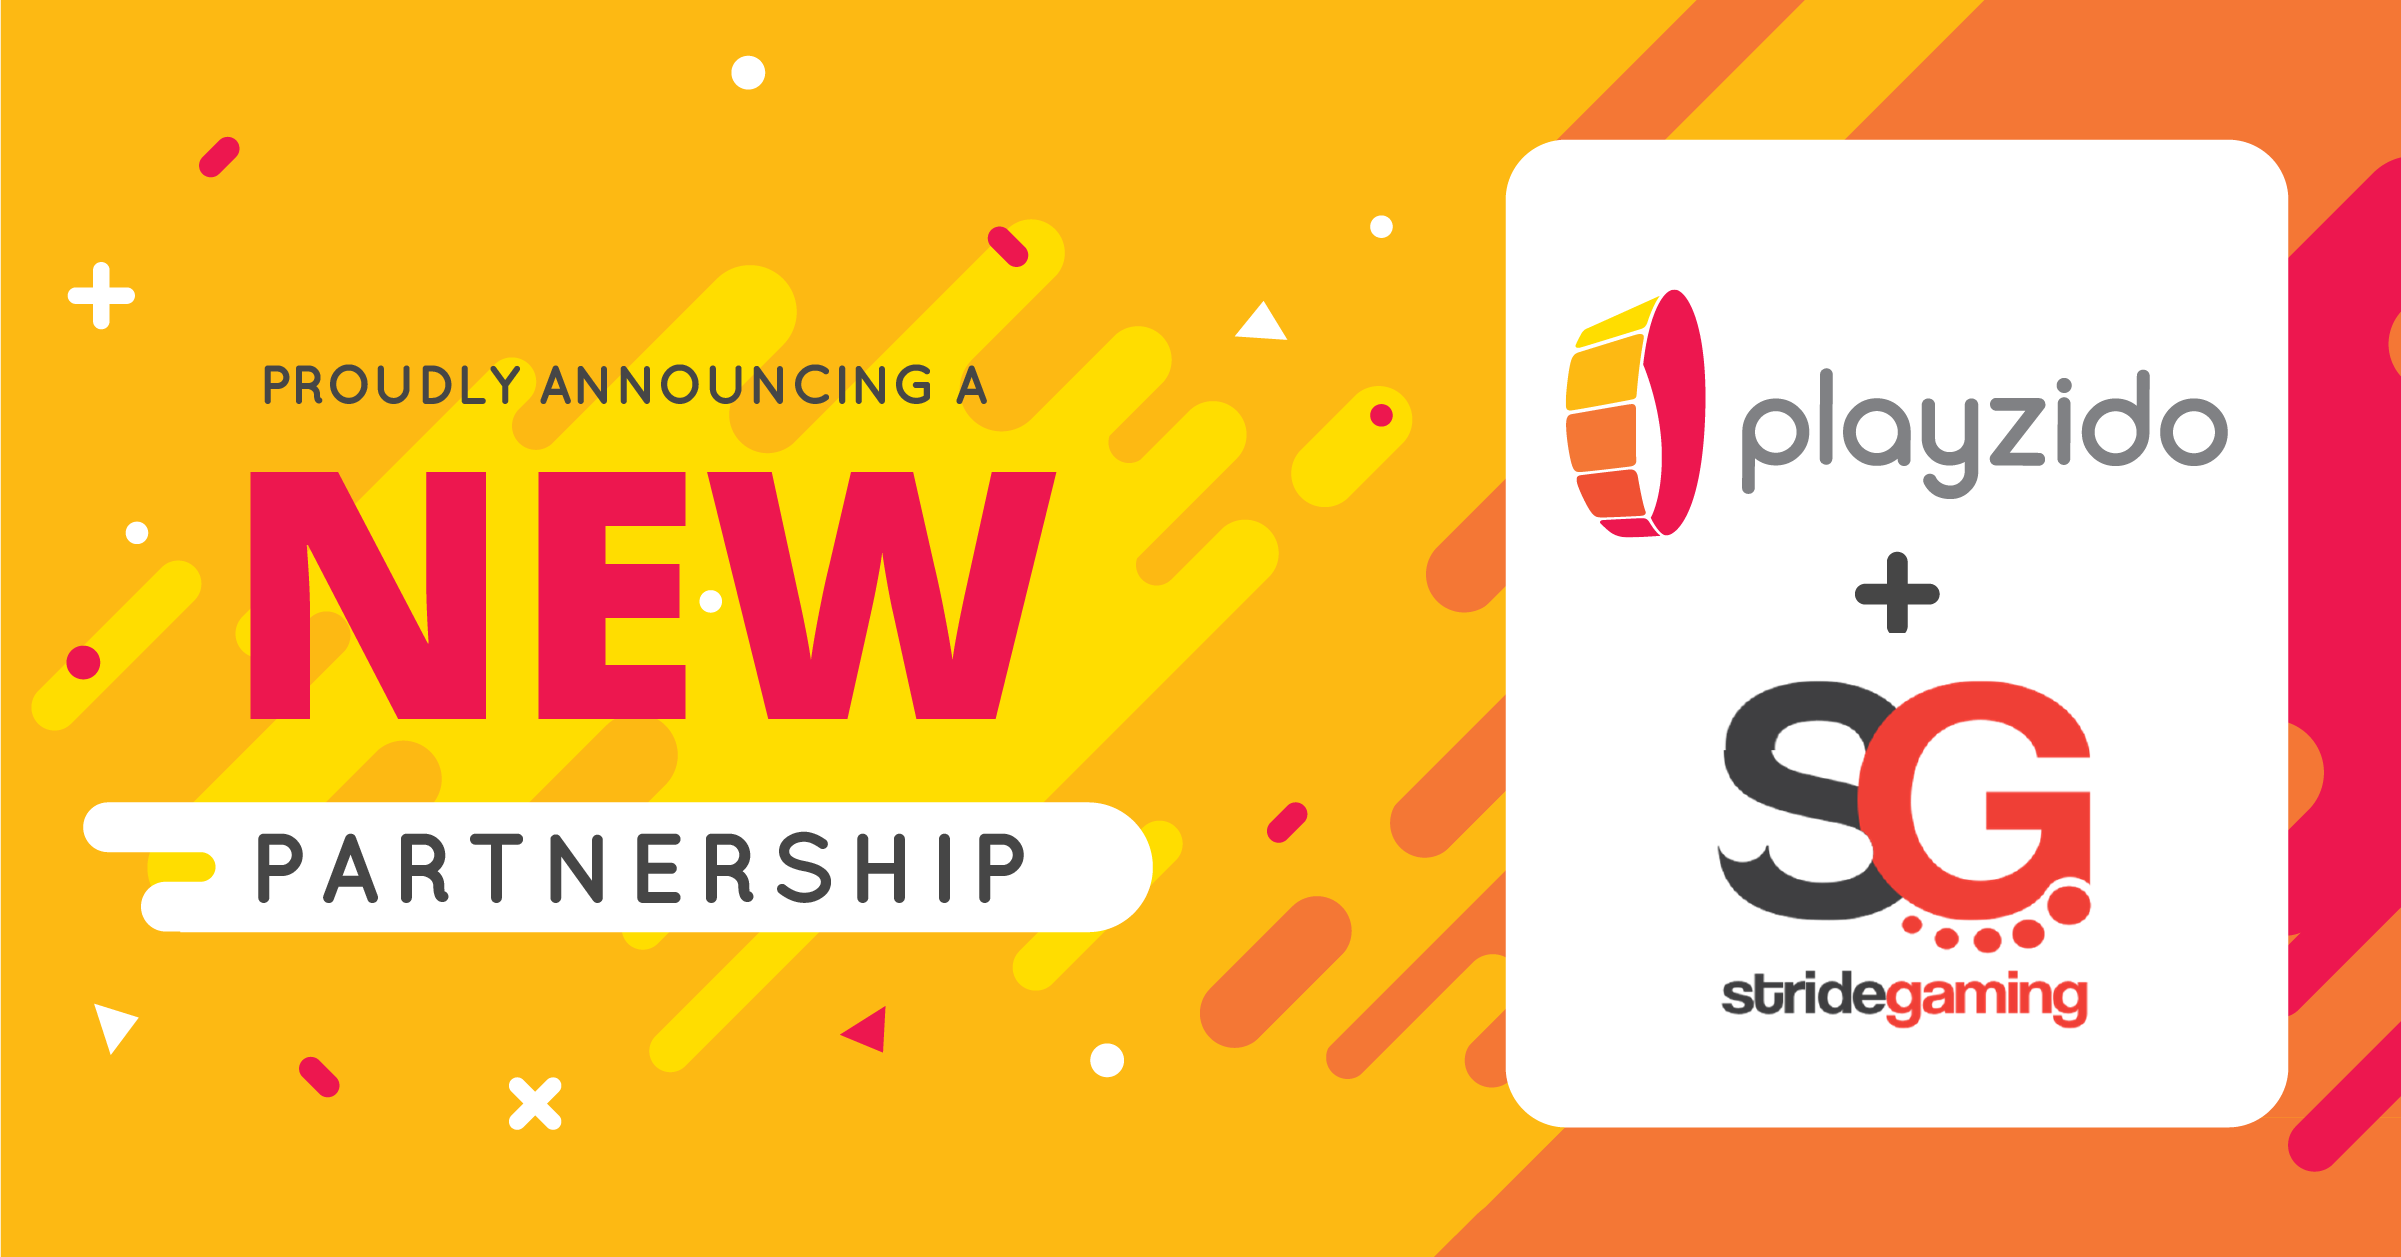 Playzido games to be launched by leading operator Stride Gaming